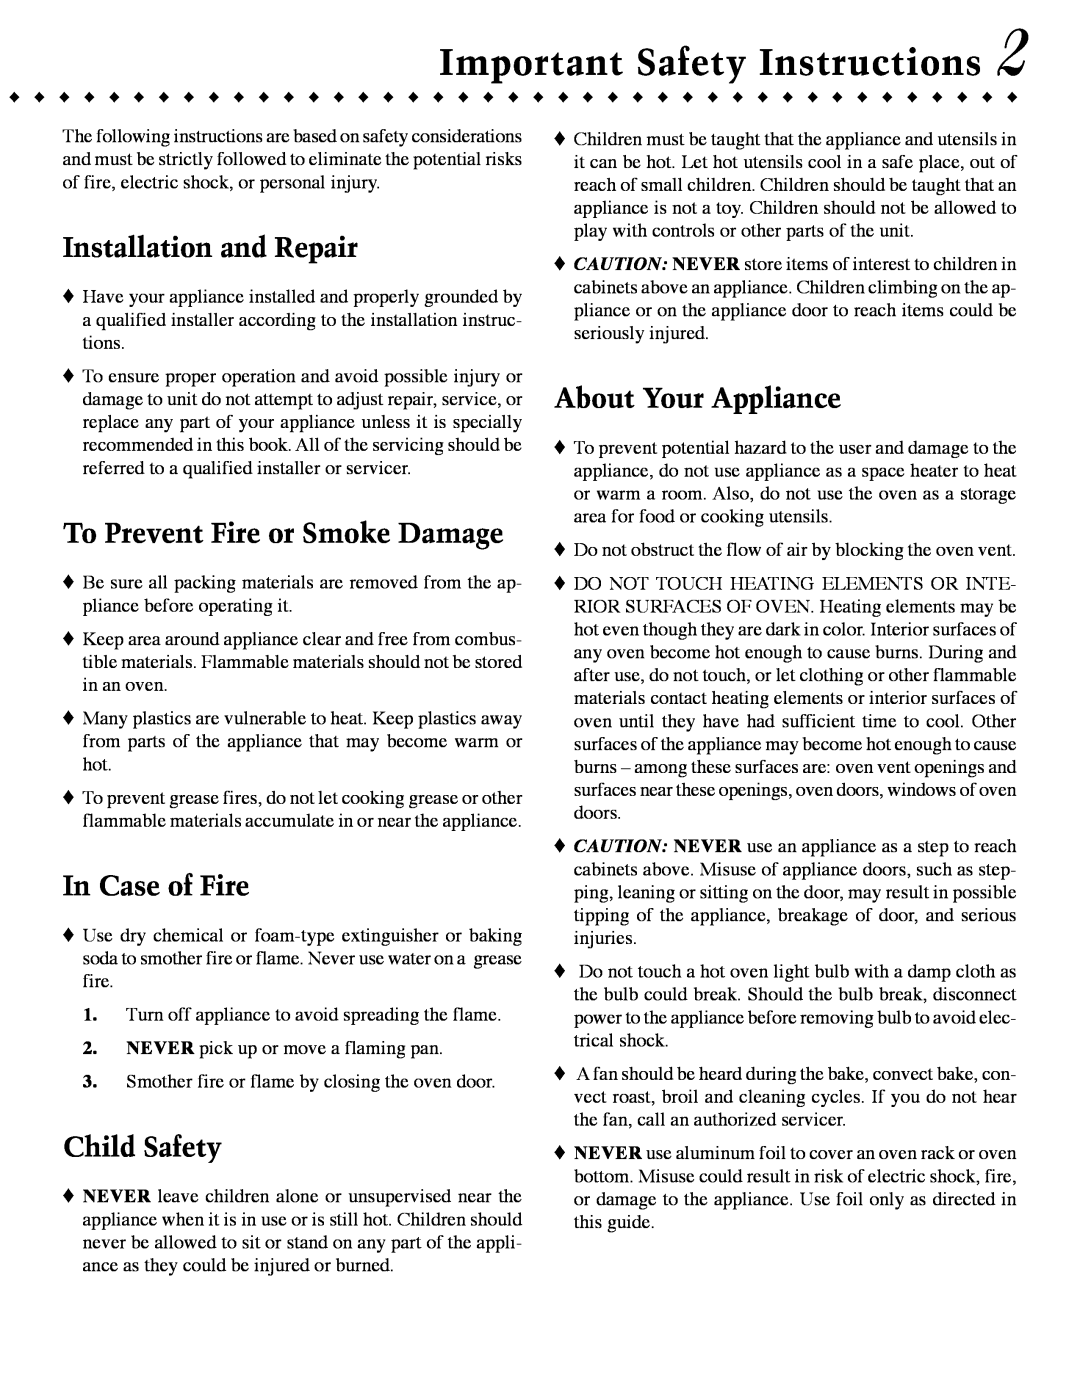 Jenn-Air JJW9630 Important Safety Instructions, Installation and Repair, To Prevent Fire or Smoke Damage, In Case of Fire 